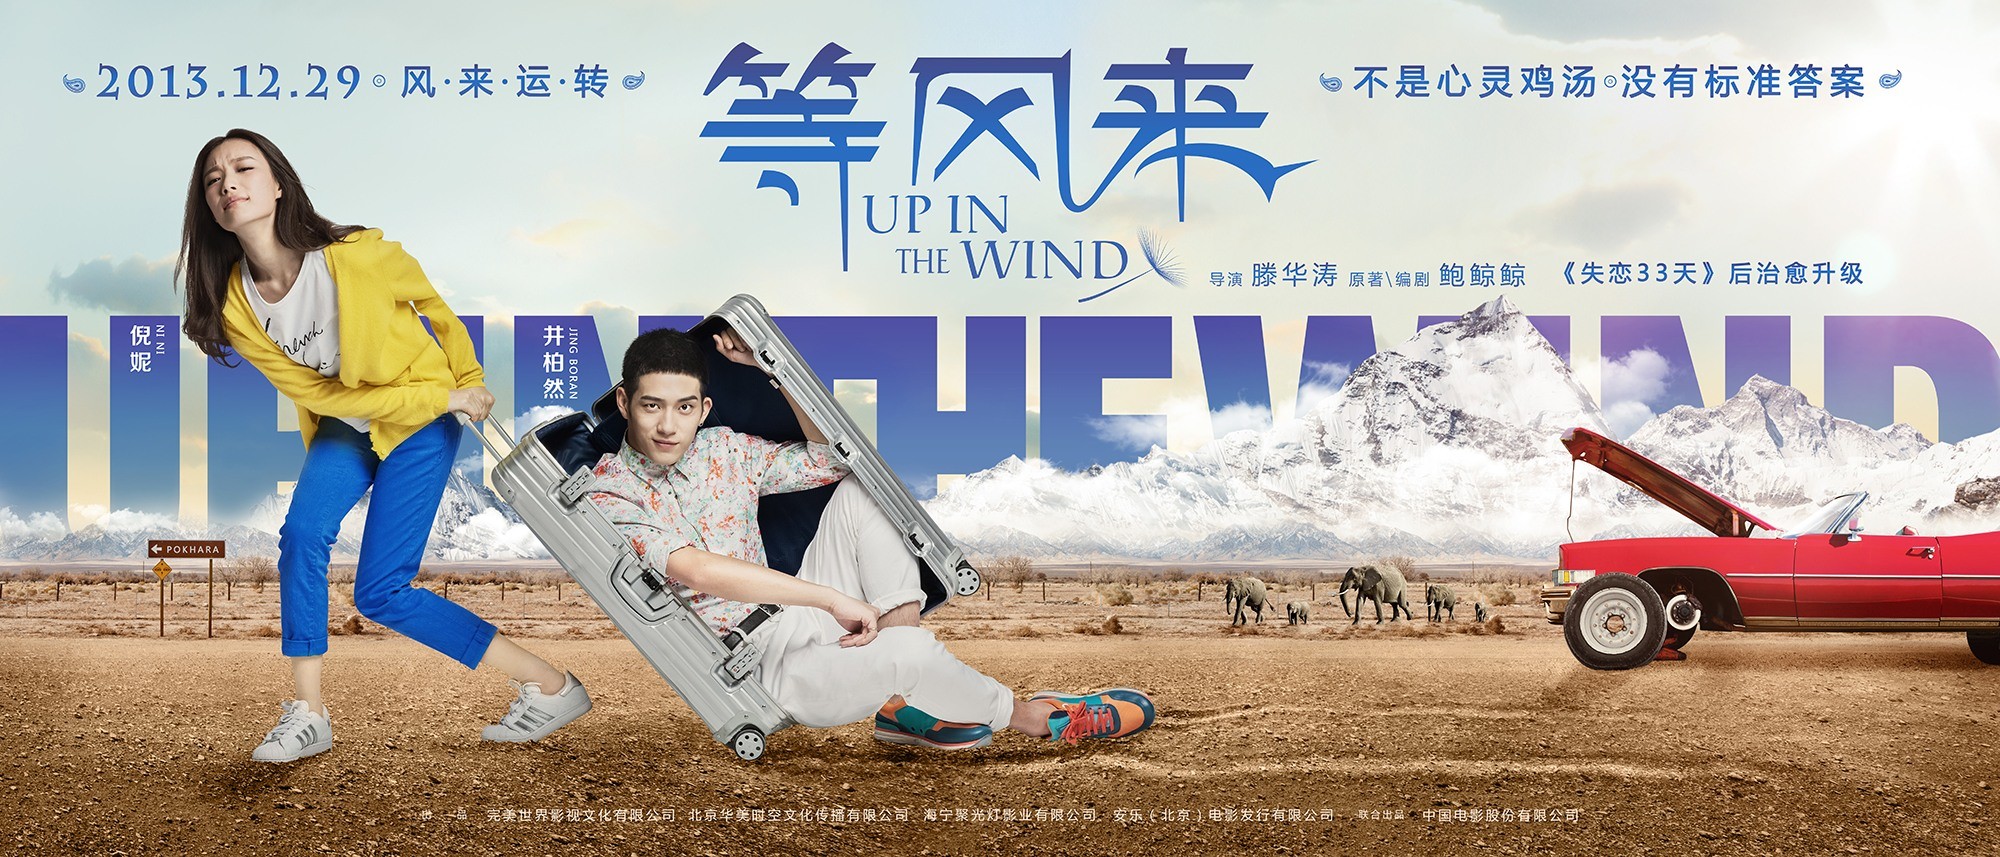 Mega Sized Movie Poster Image for Up in the Wind (#4 of 8)